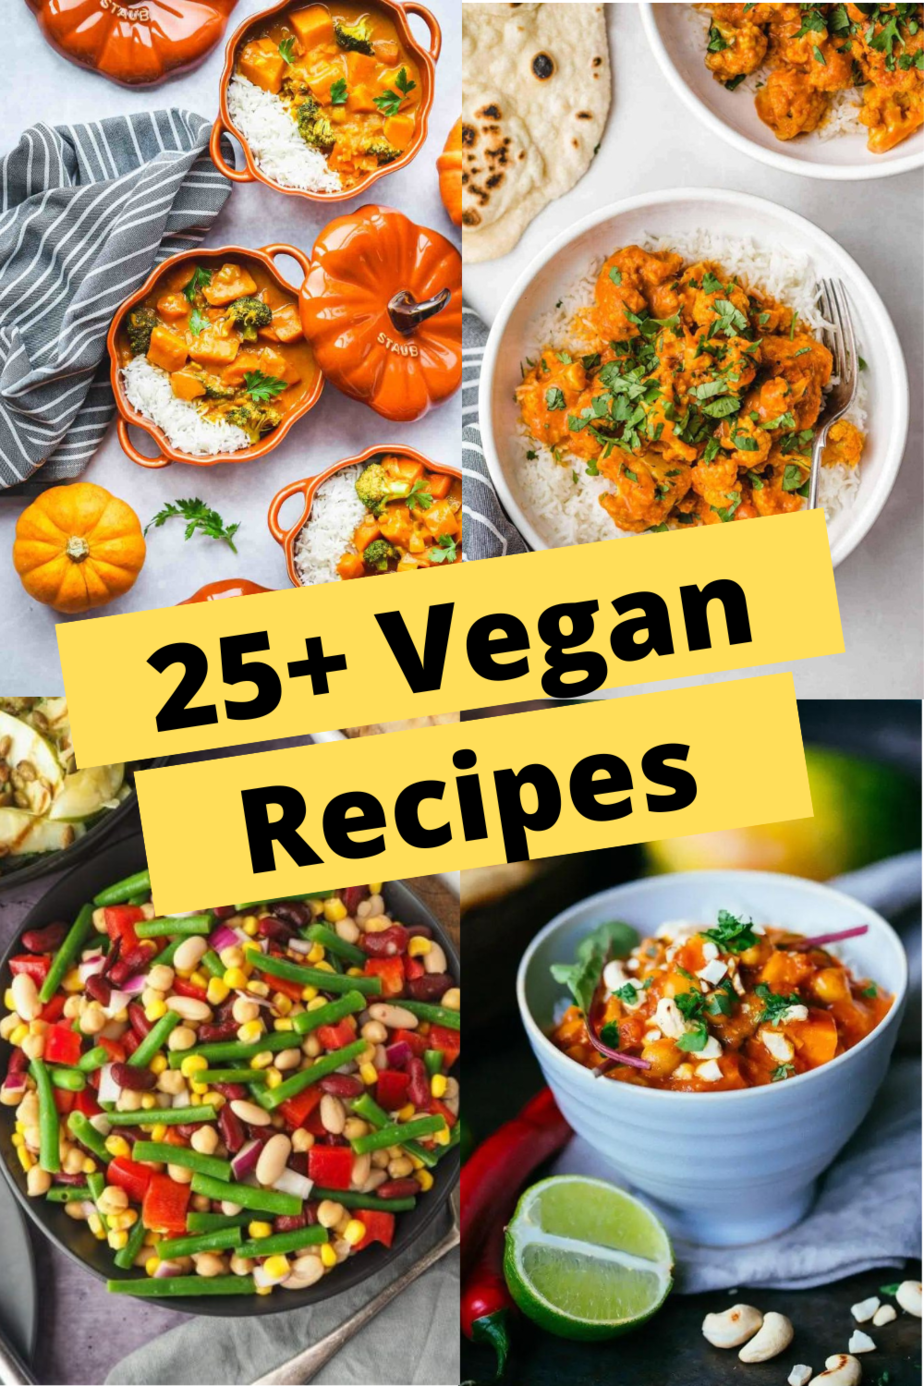 These vegan recipes are super tasty and there's something here for breakfast lunch and dinner - and desserts too!